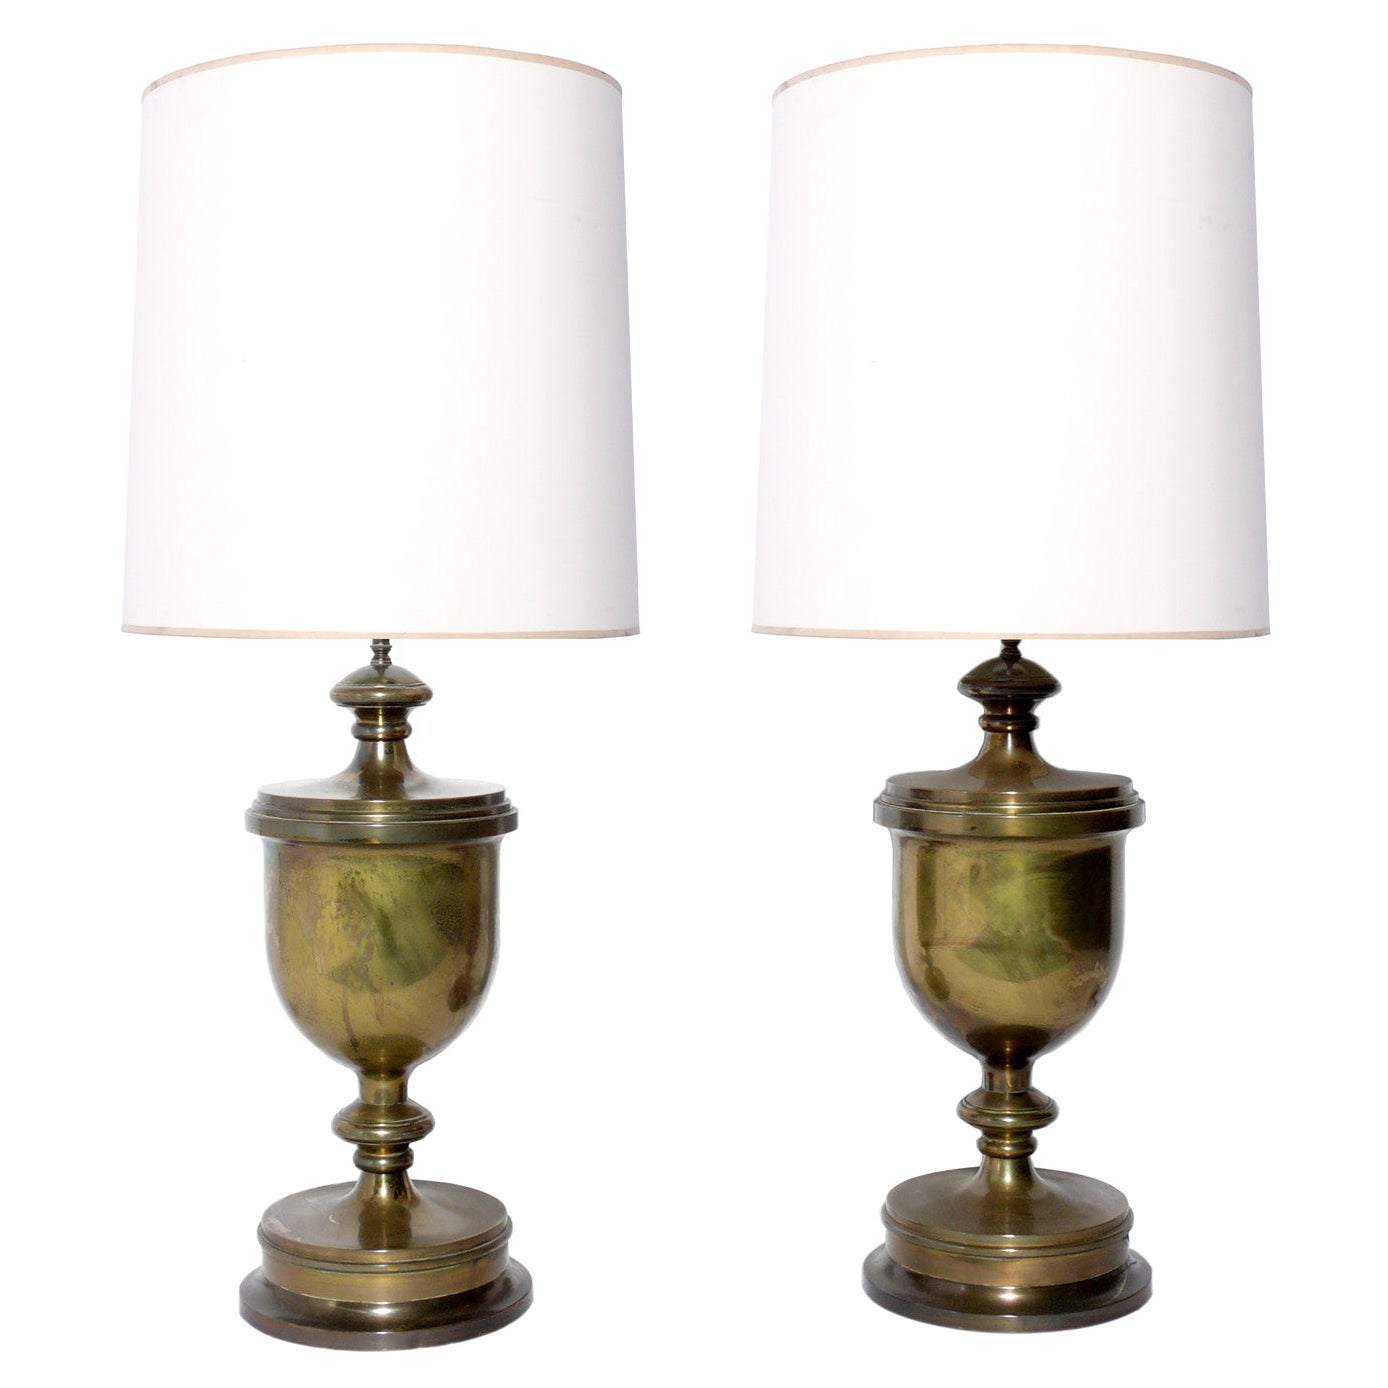 Large Scale English Brass Urn Lamps